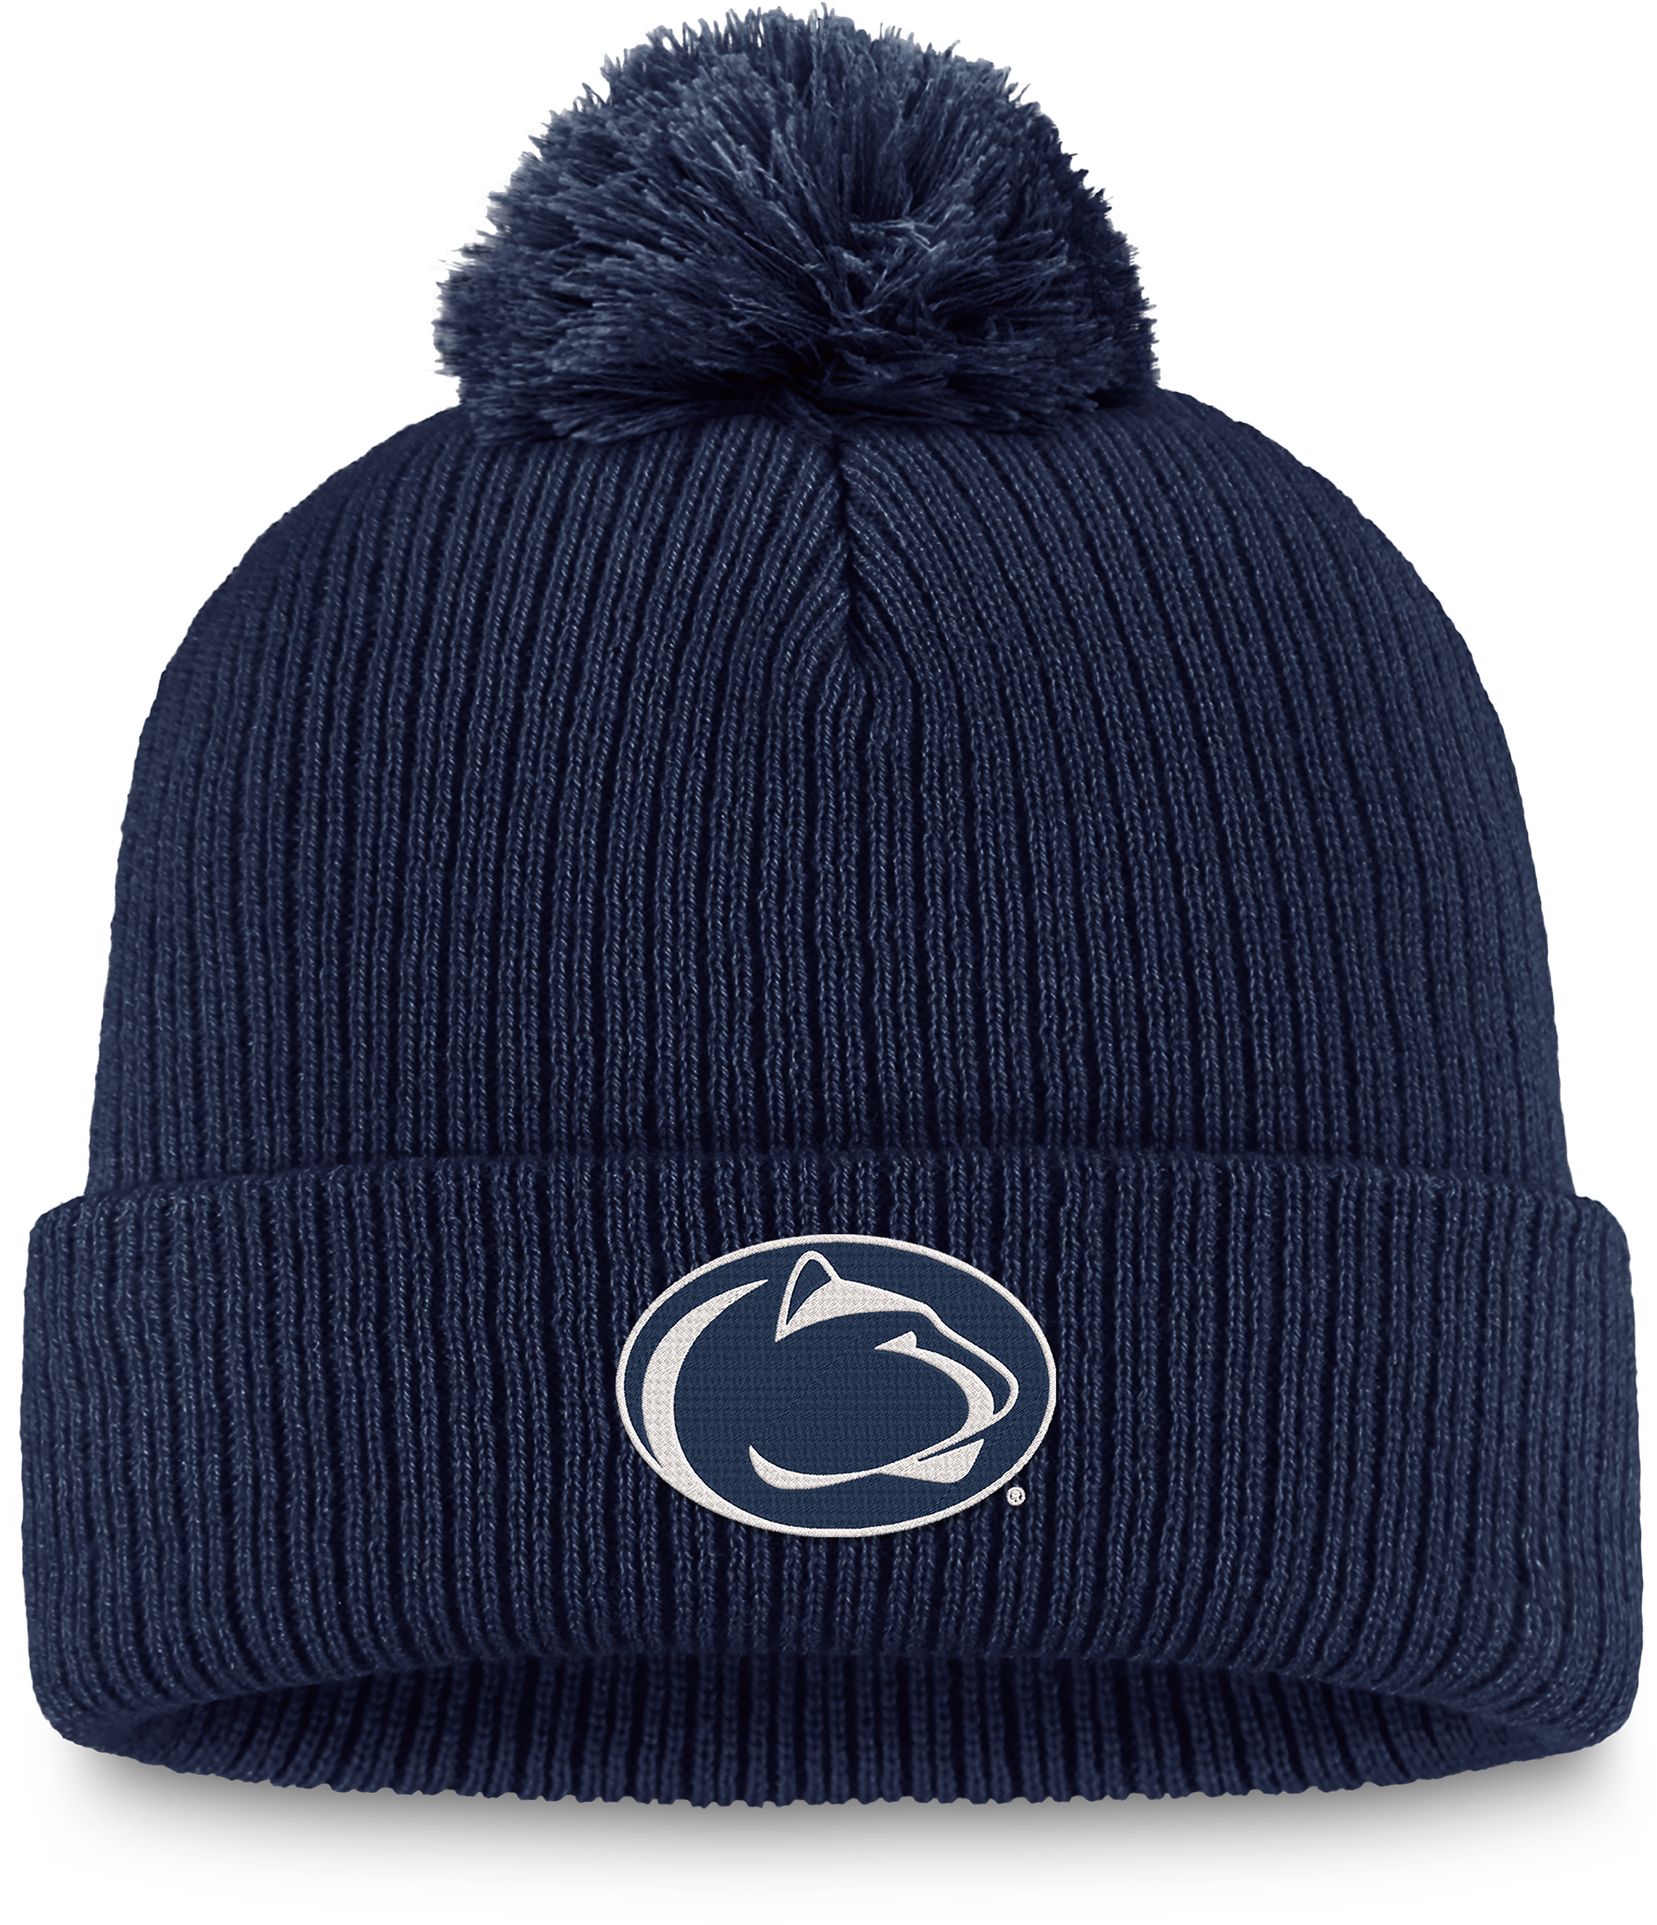 TOP OF THE WORLD PENN STATE NITTANY LIONS BLUE CUFFED POM KNIT BEANIE INTERNATIONAL SHIPPING